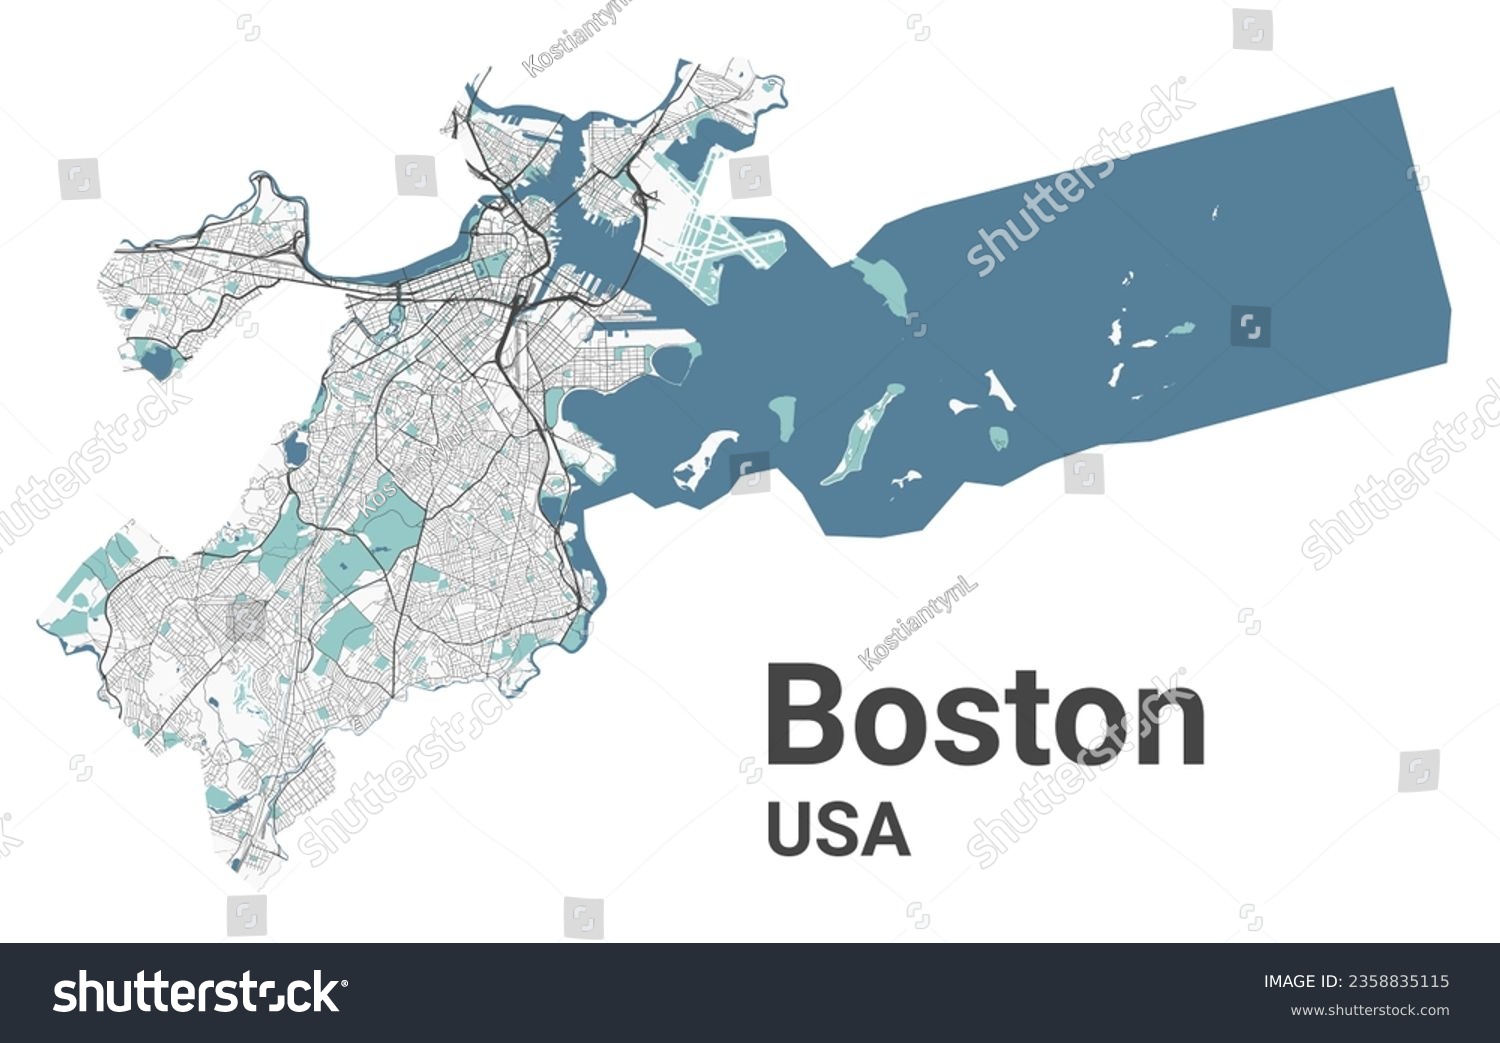 SVG of Boston map, American city. Municipal administrative area map with rivers and roads, parks and railways. Vector illustration. svg